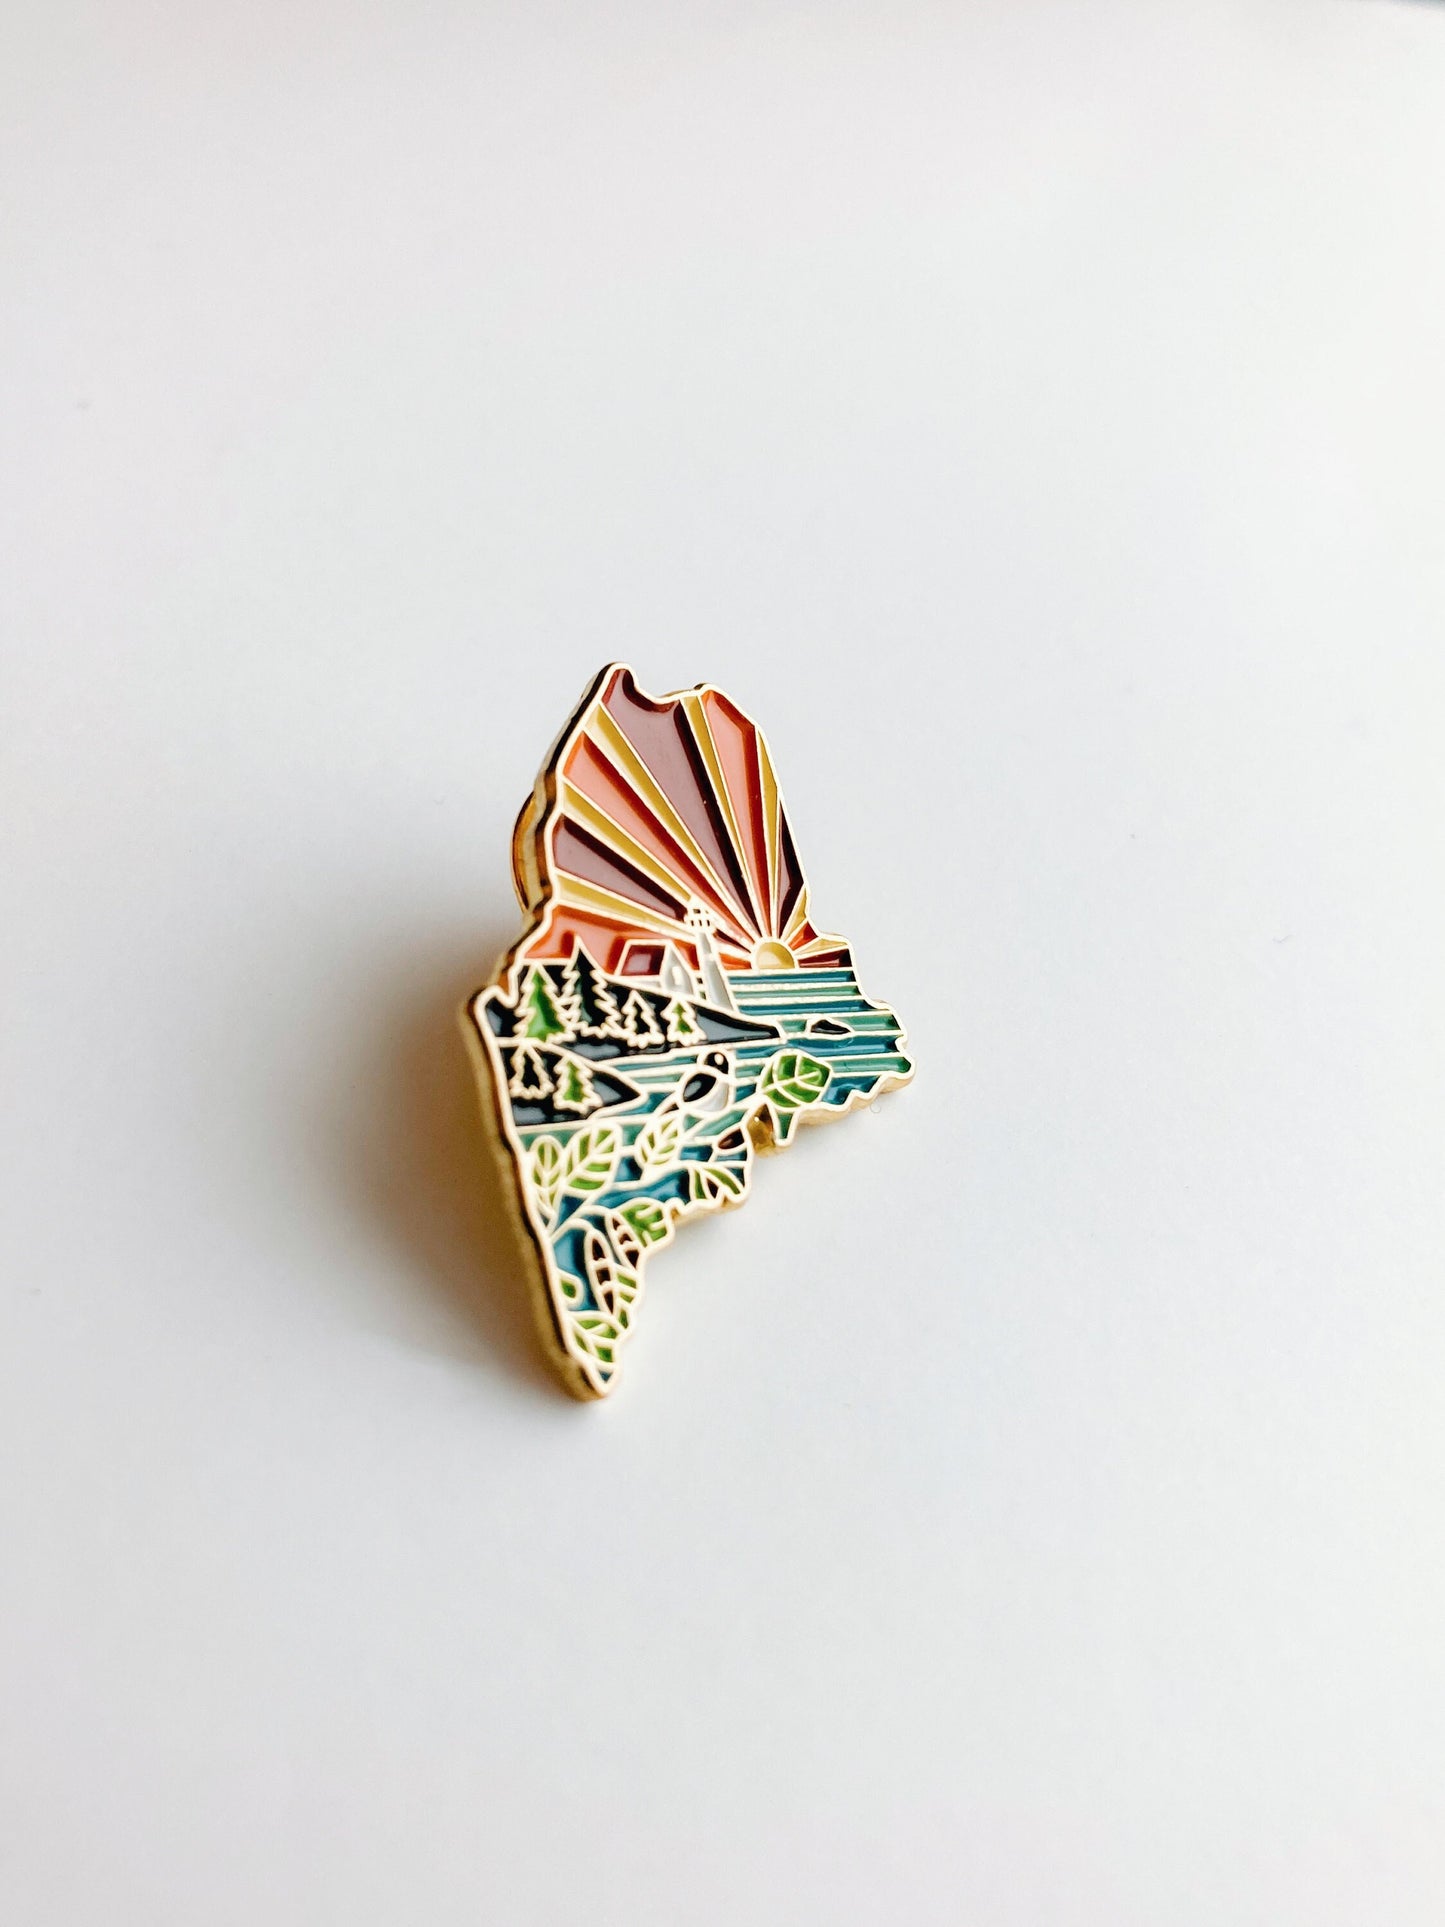 Maine Enamel Pin | Gold Soft Enamel Pin | Illustrated United States Pin | Butterfly Clasp | 1.25"